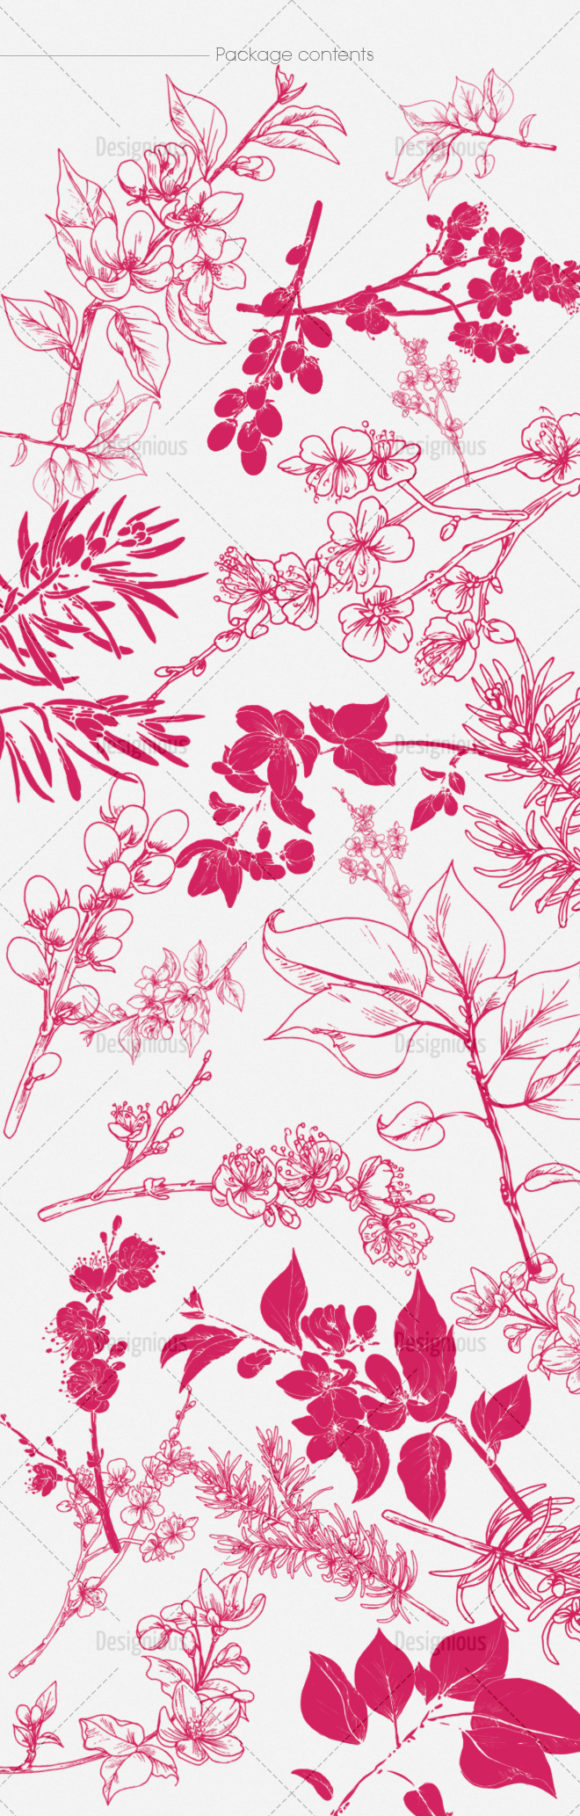 Blossomed Branches Brushes Pack 1 2